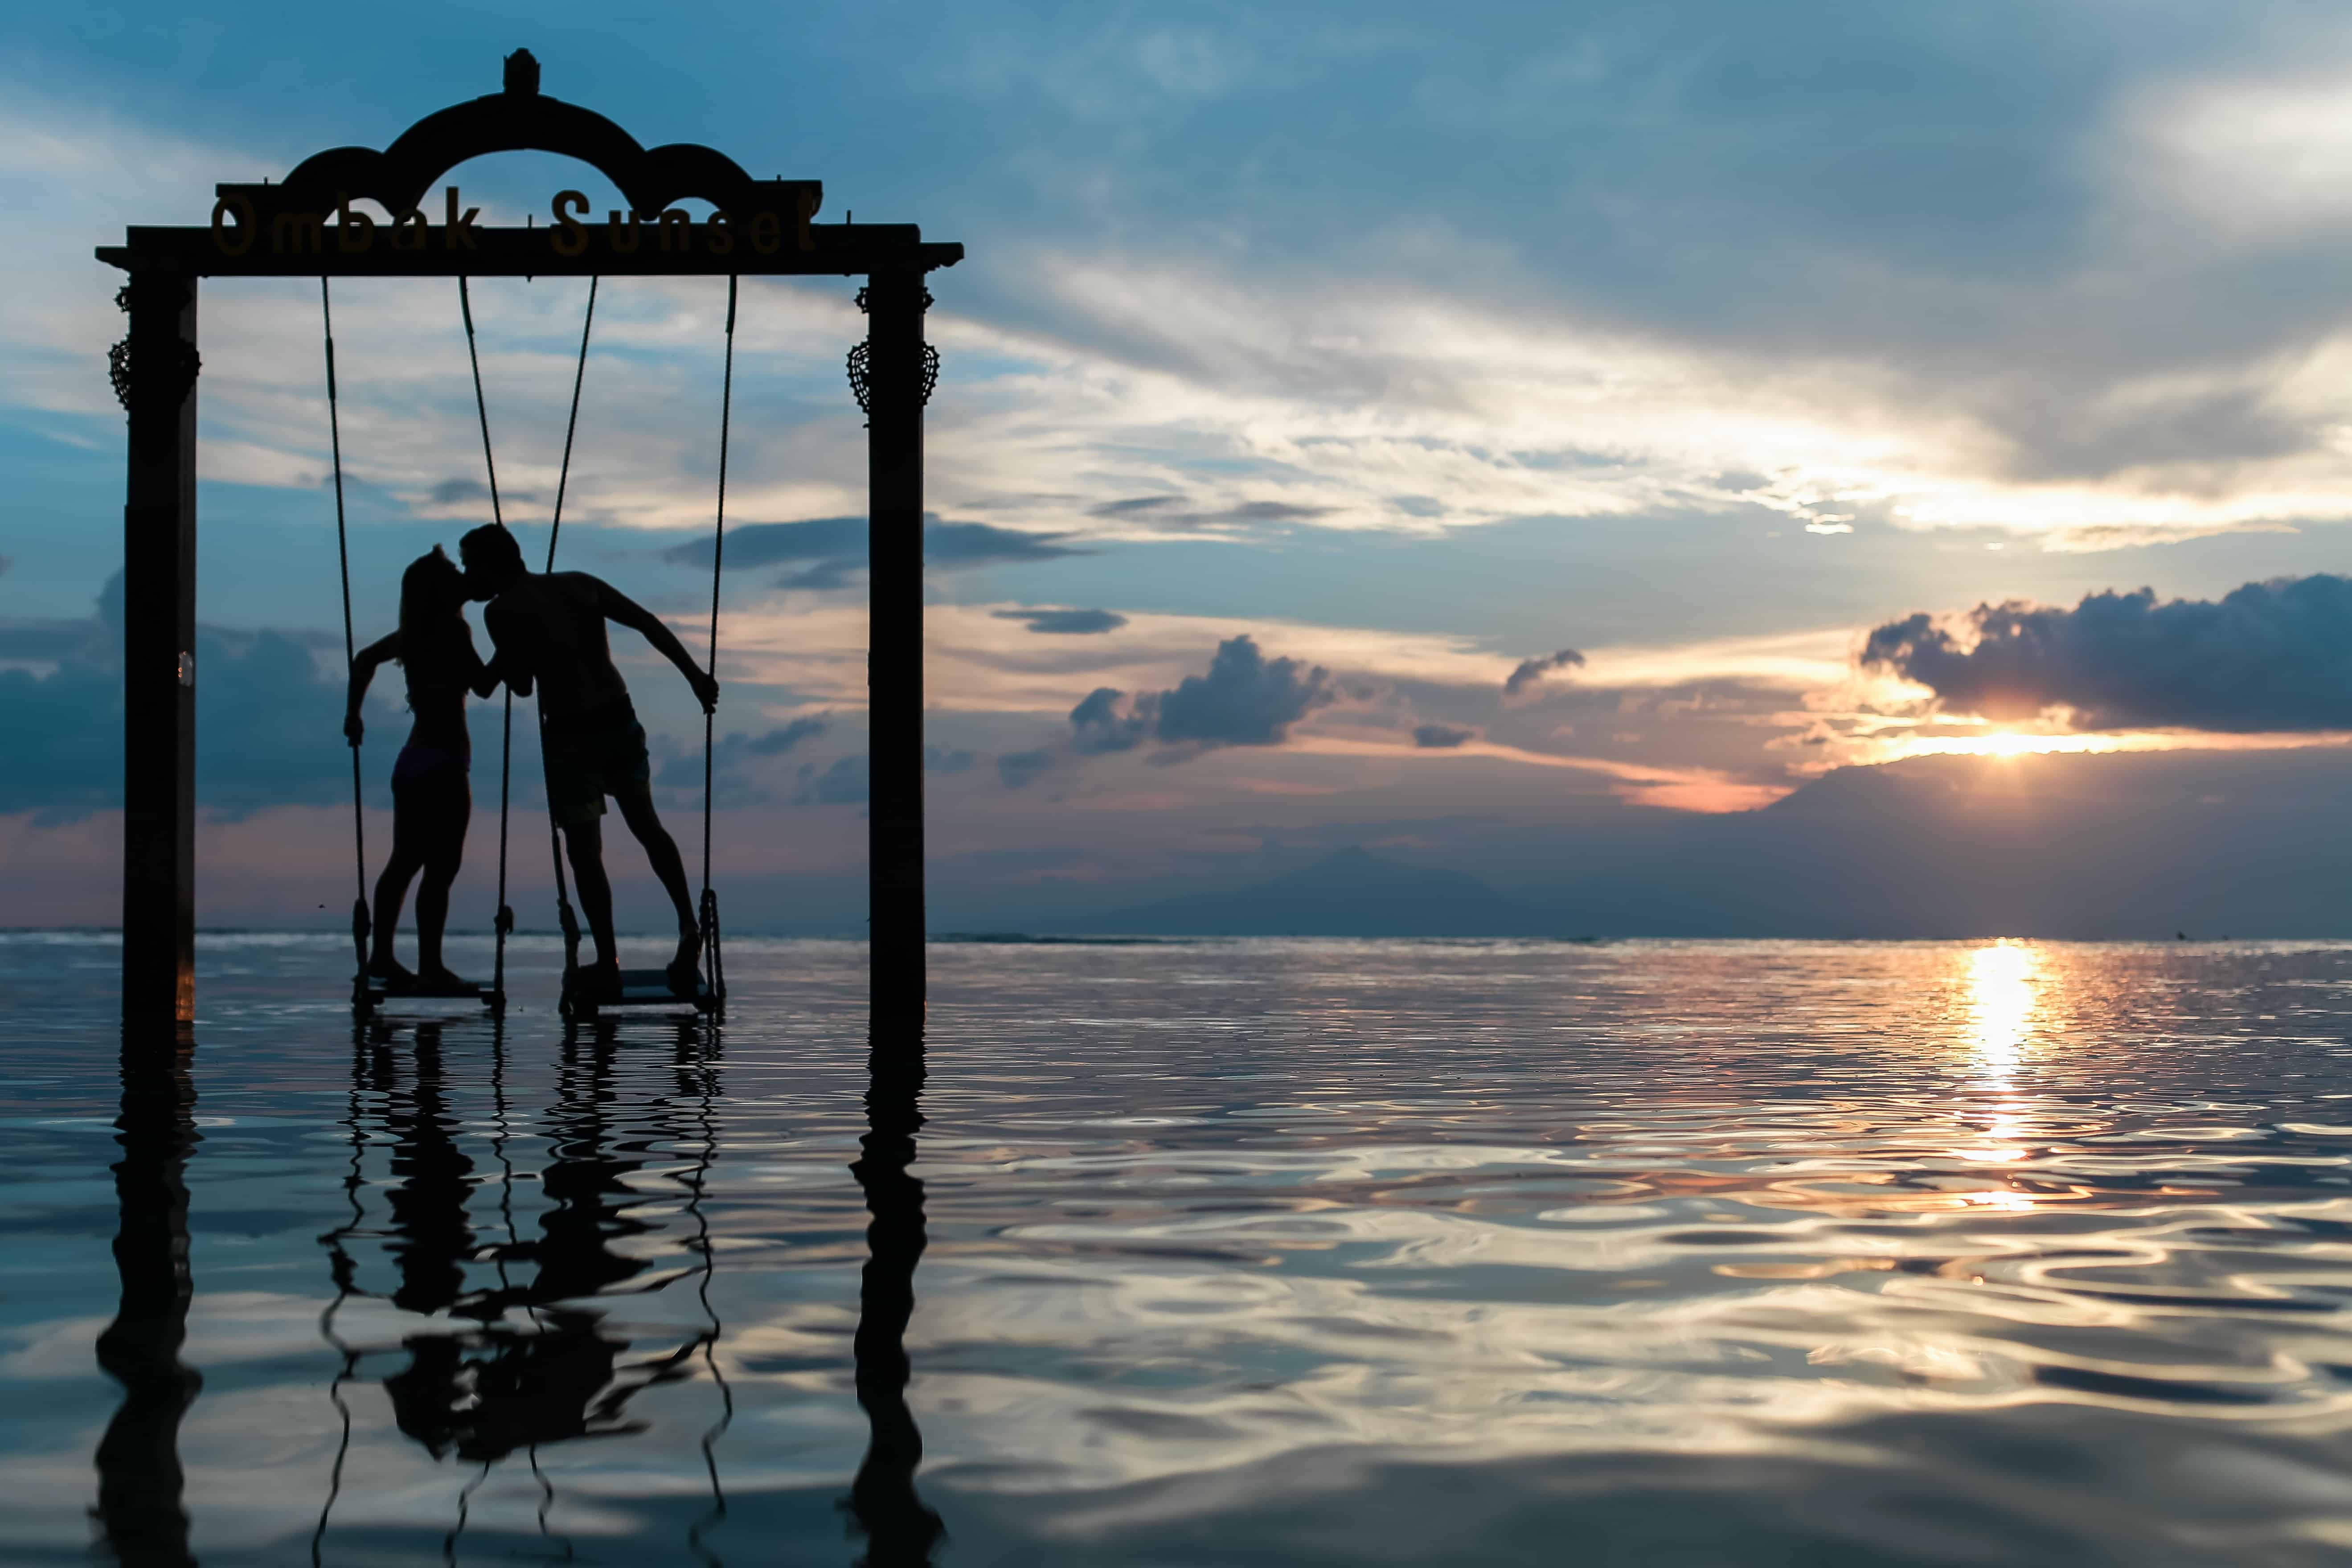 A couple stands on a swing in the ocean